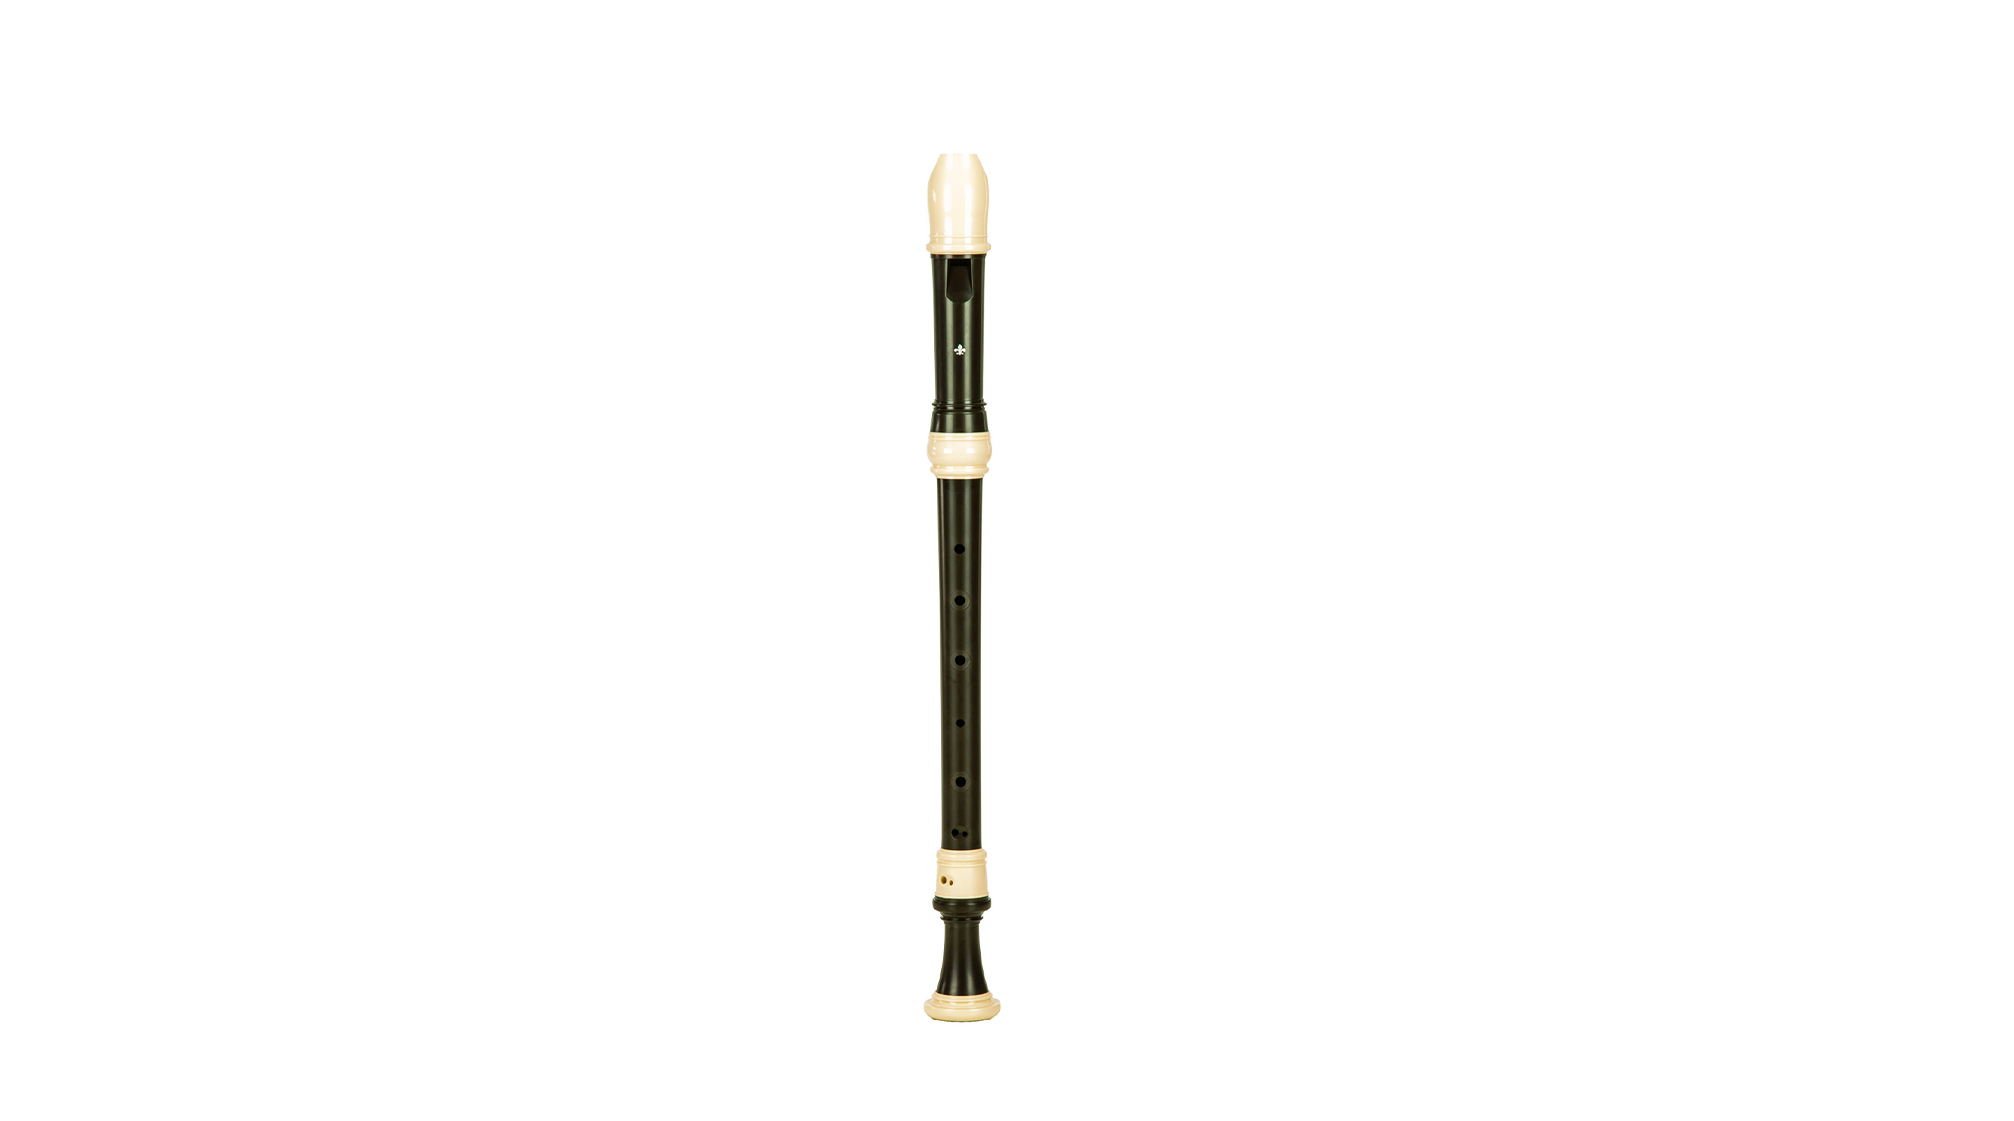 Zen On, "Bressan", alto in f', baroque double hole, 415 Hz, plastic with white trim rings